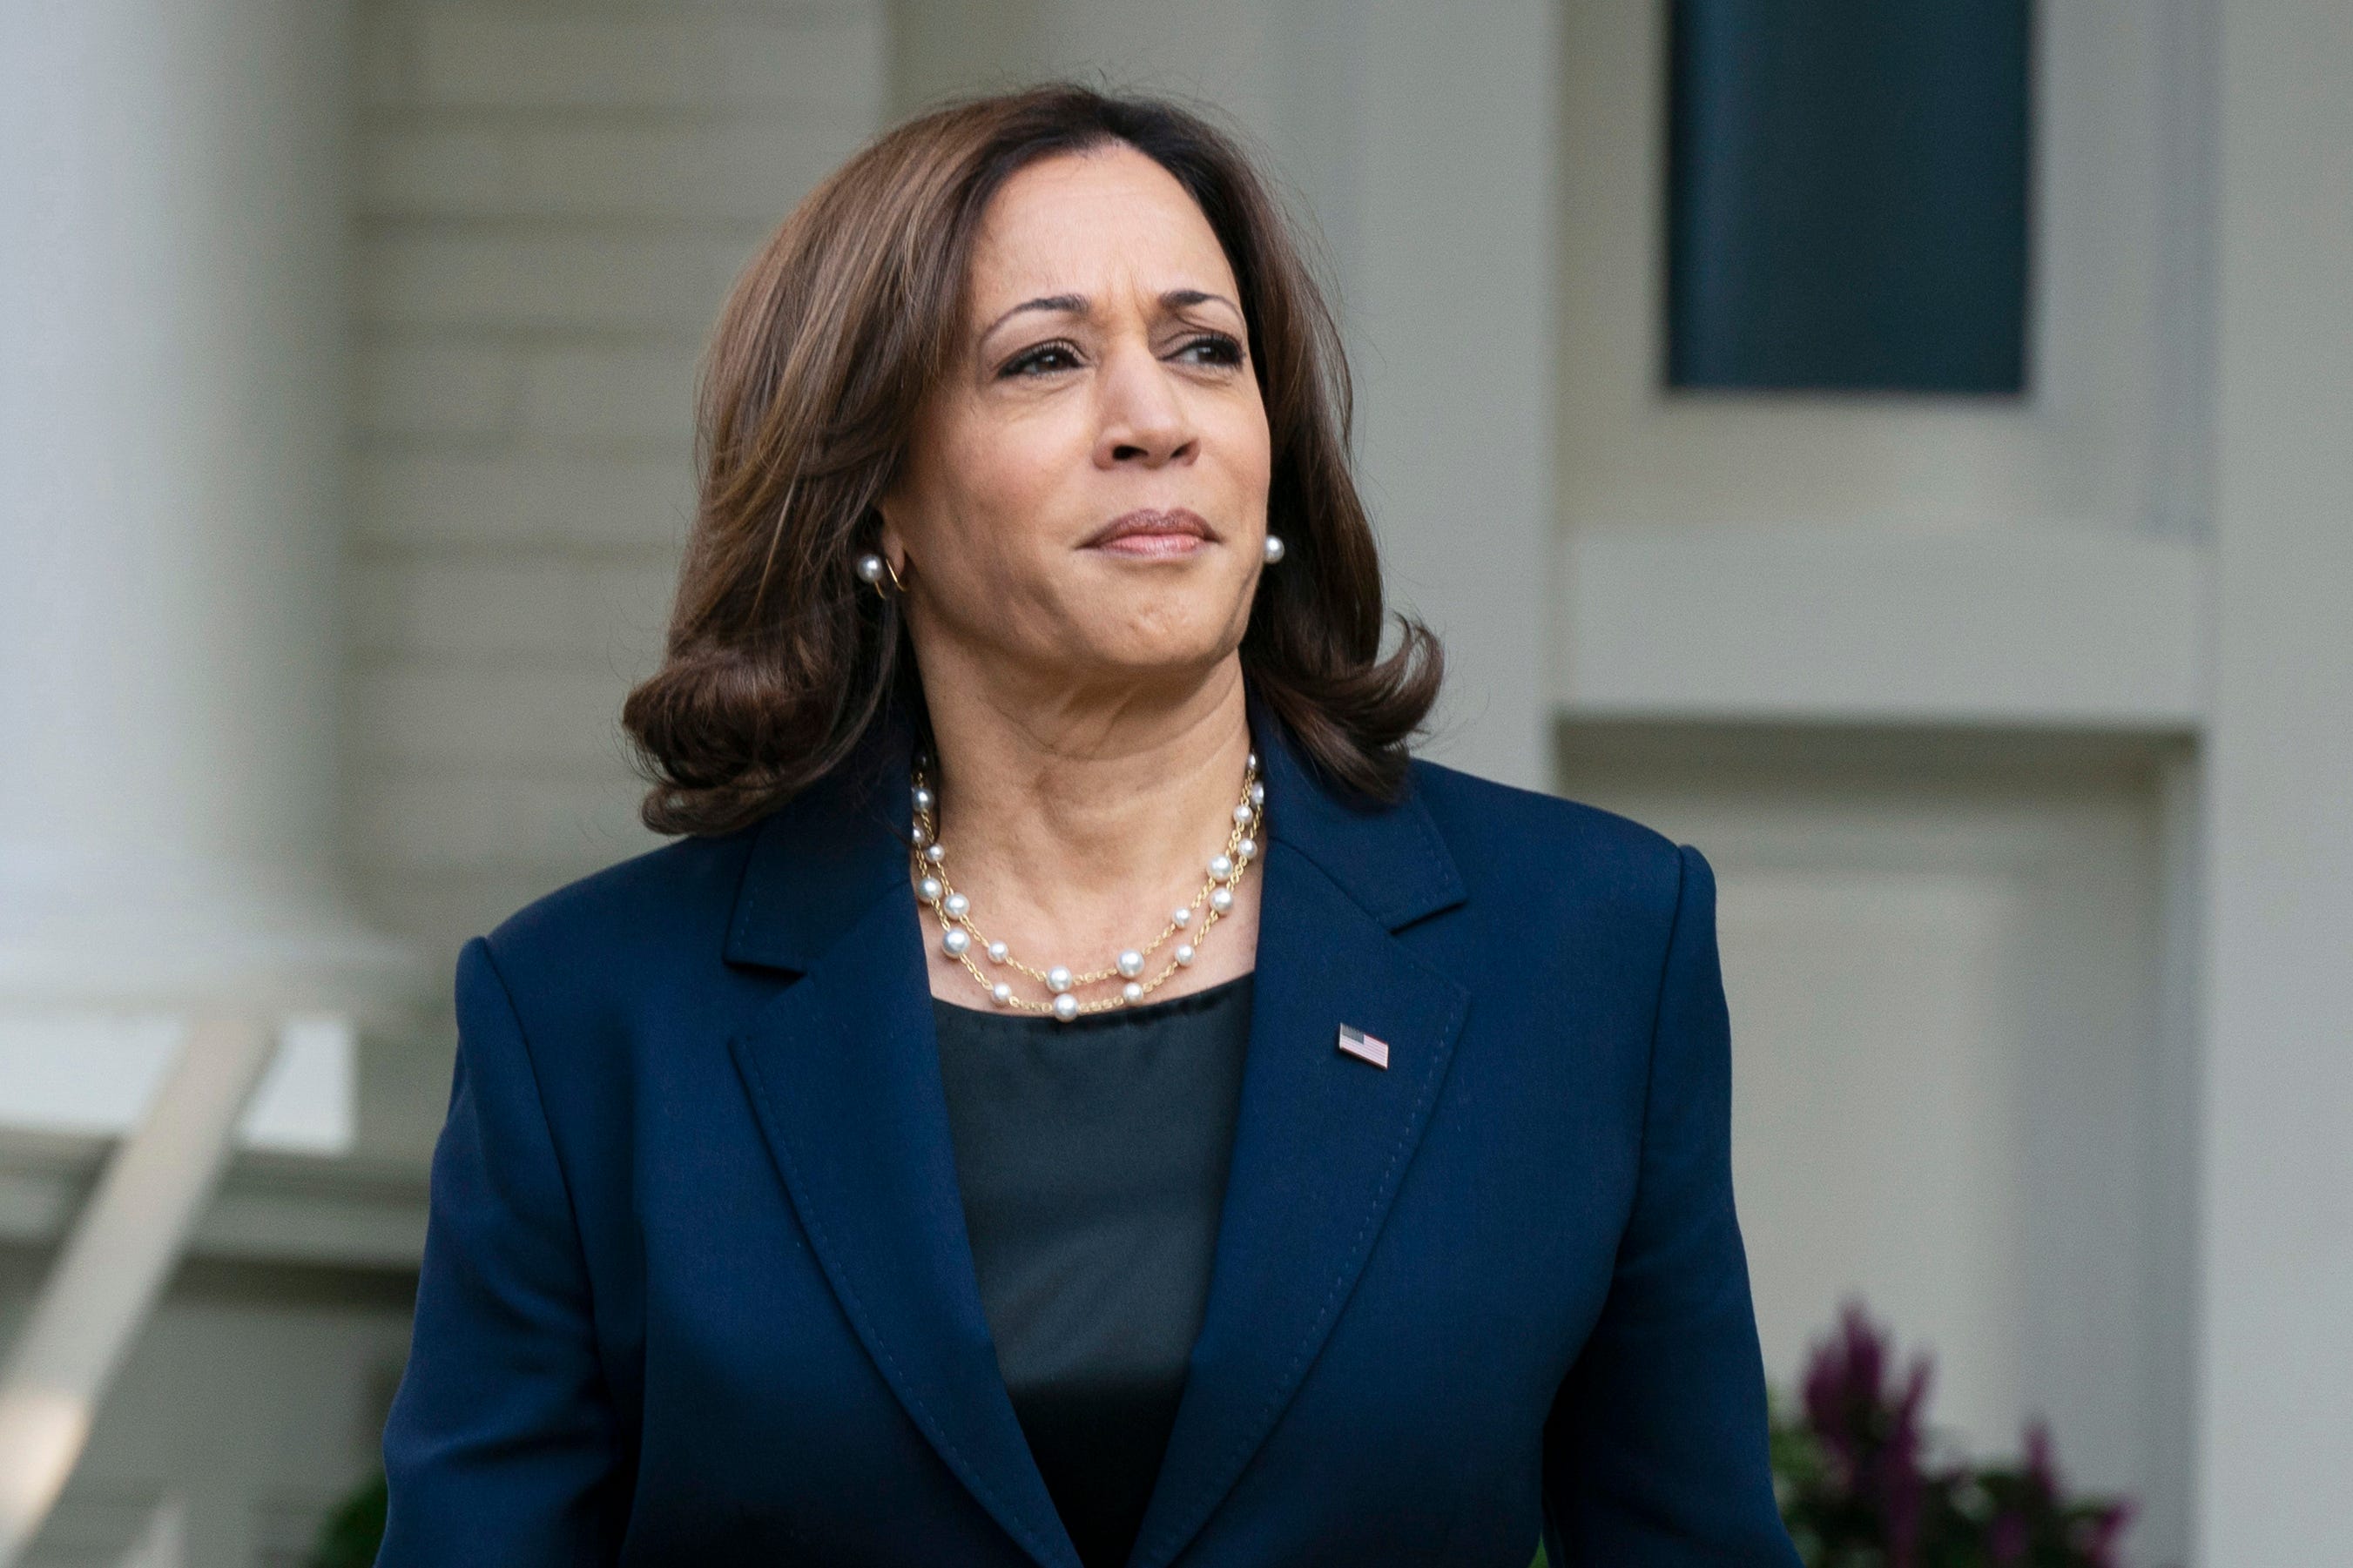 As states restrict abortion, VP Kamala Harris to mark 50th anniversary of Roe by urging greater access